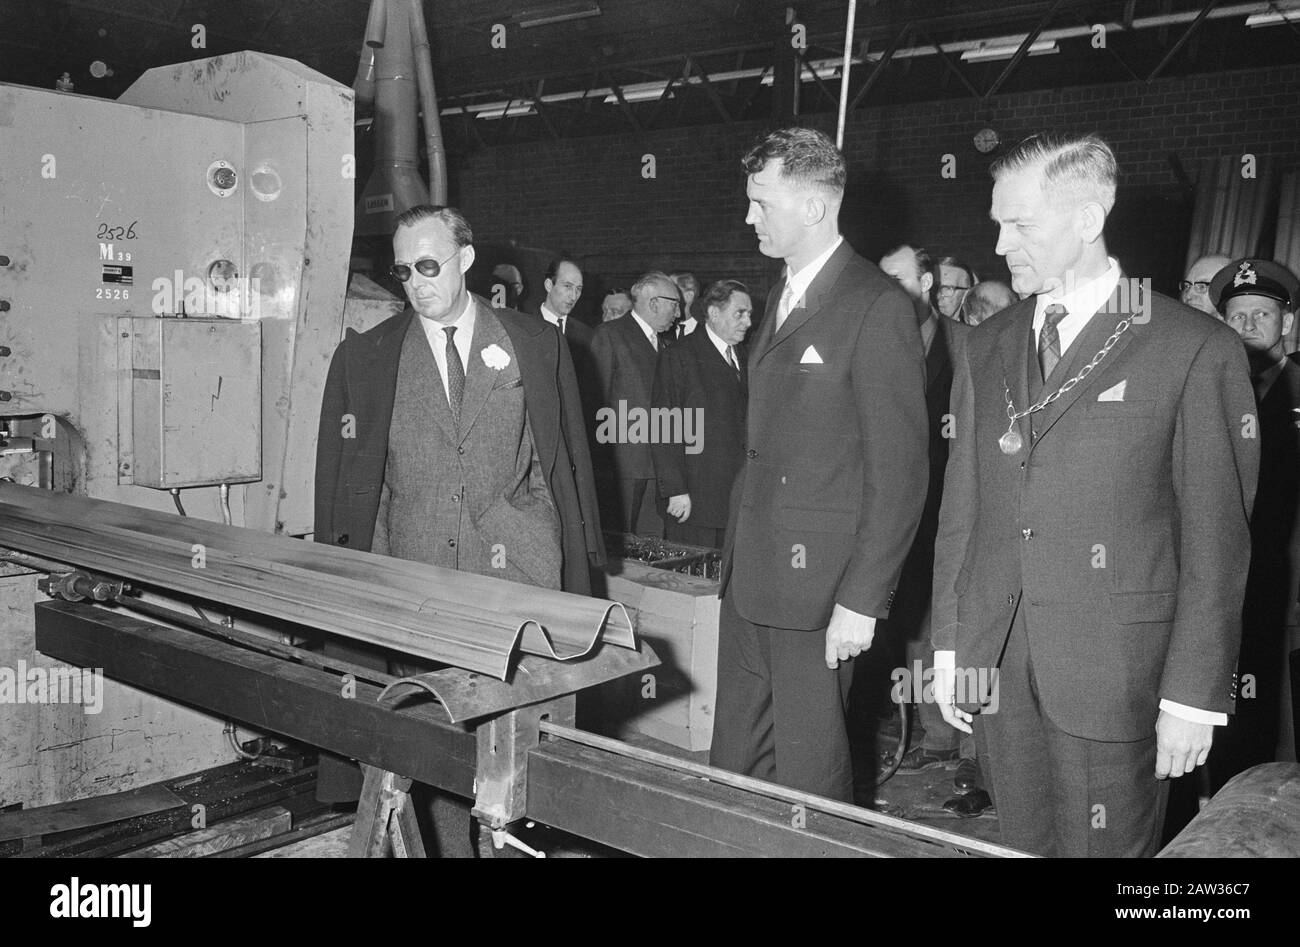 Prince Bernhard spent working visit to Friesland, Dokkum opened the prince two new assembly plants Date: March 31, 1966 Location: Dokkum, Friesland Keywords: princes, visits Person Name: Bernhard prince Stock Photo